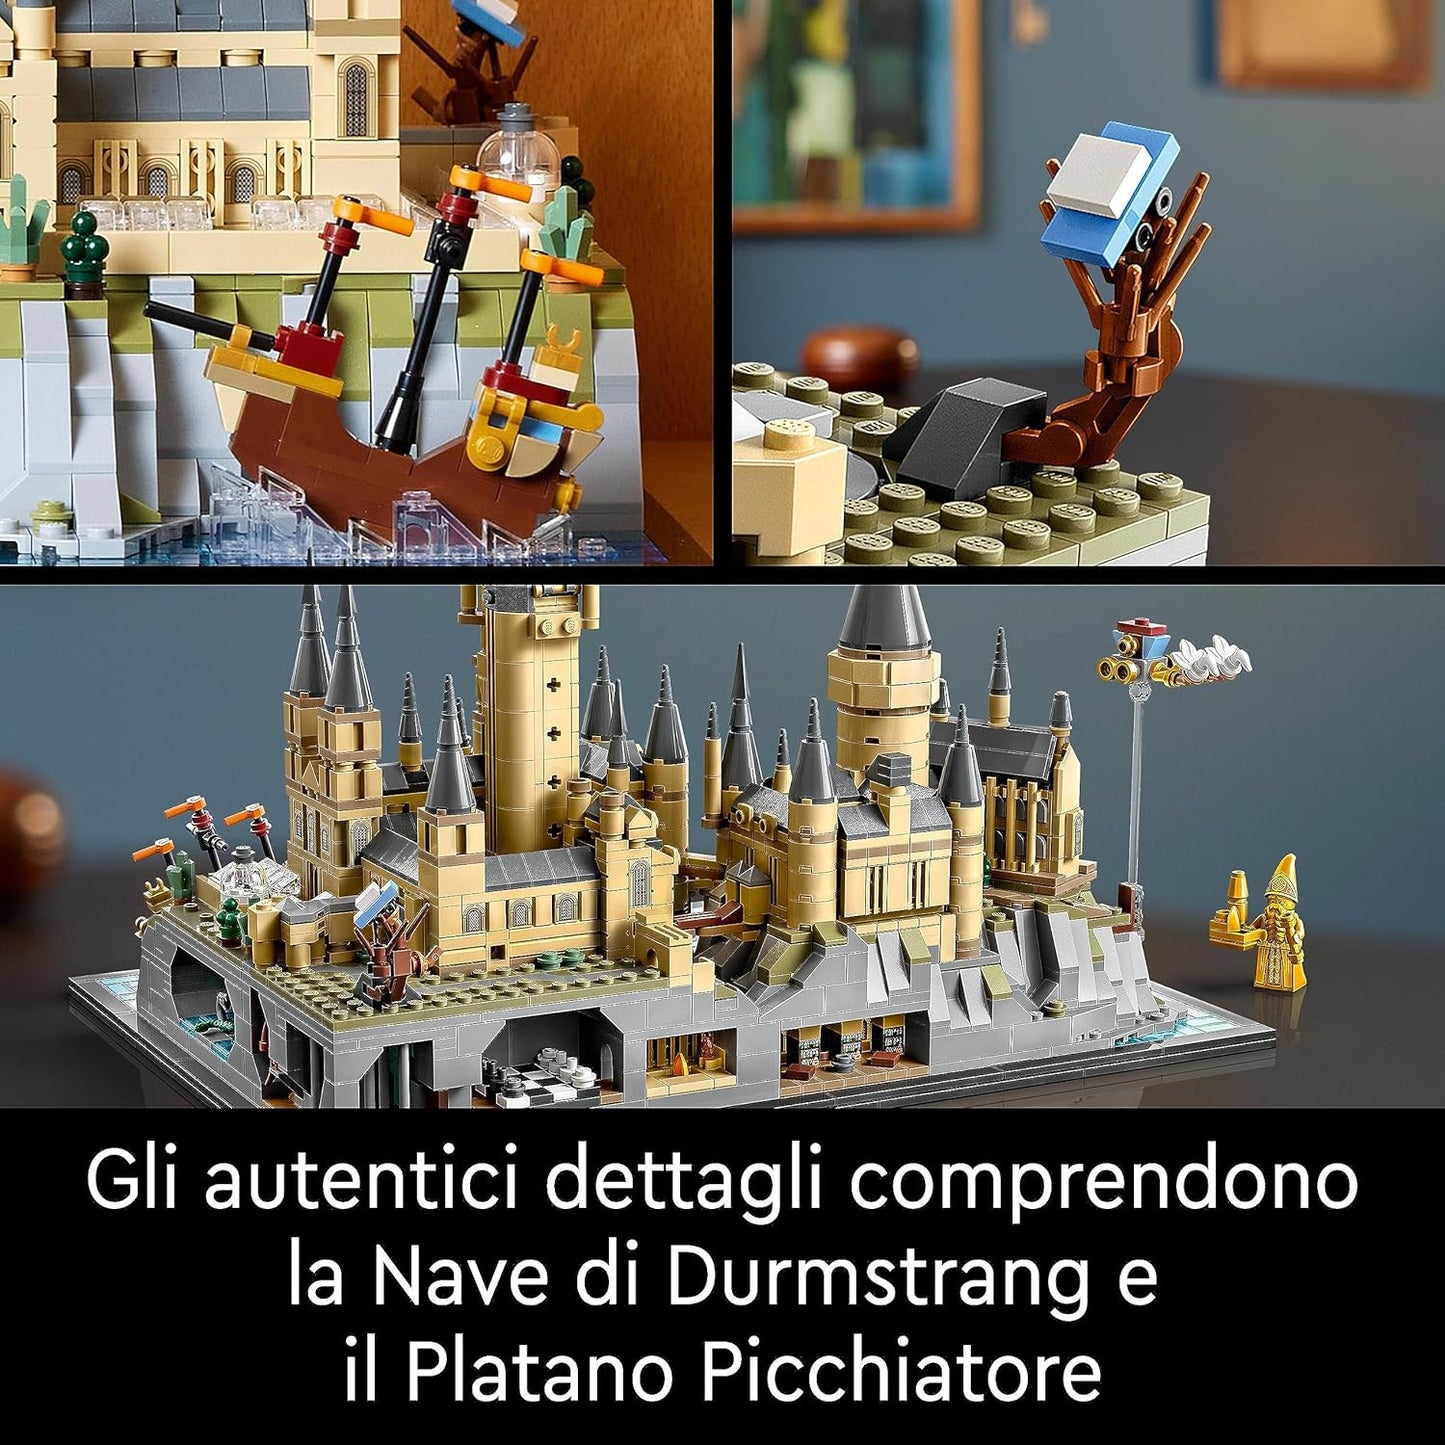 LEGO® Harry Potter™ Hogwarts™ Castle and Grounds 76419 Building Set; for Adult Fans; Detailed Buildable Display Model; Recreate an Iconic Location in The Wizarding World (2,660 Pieces)